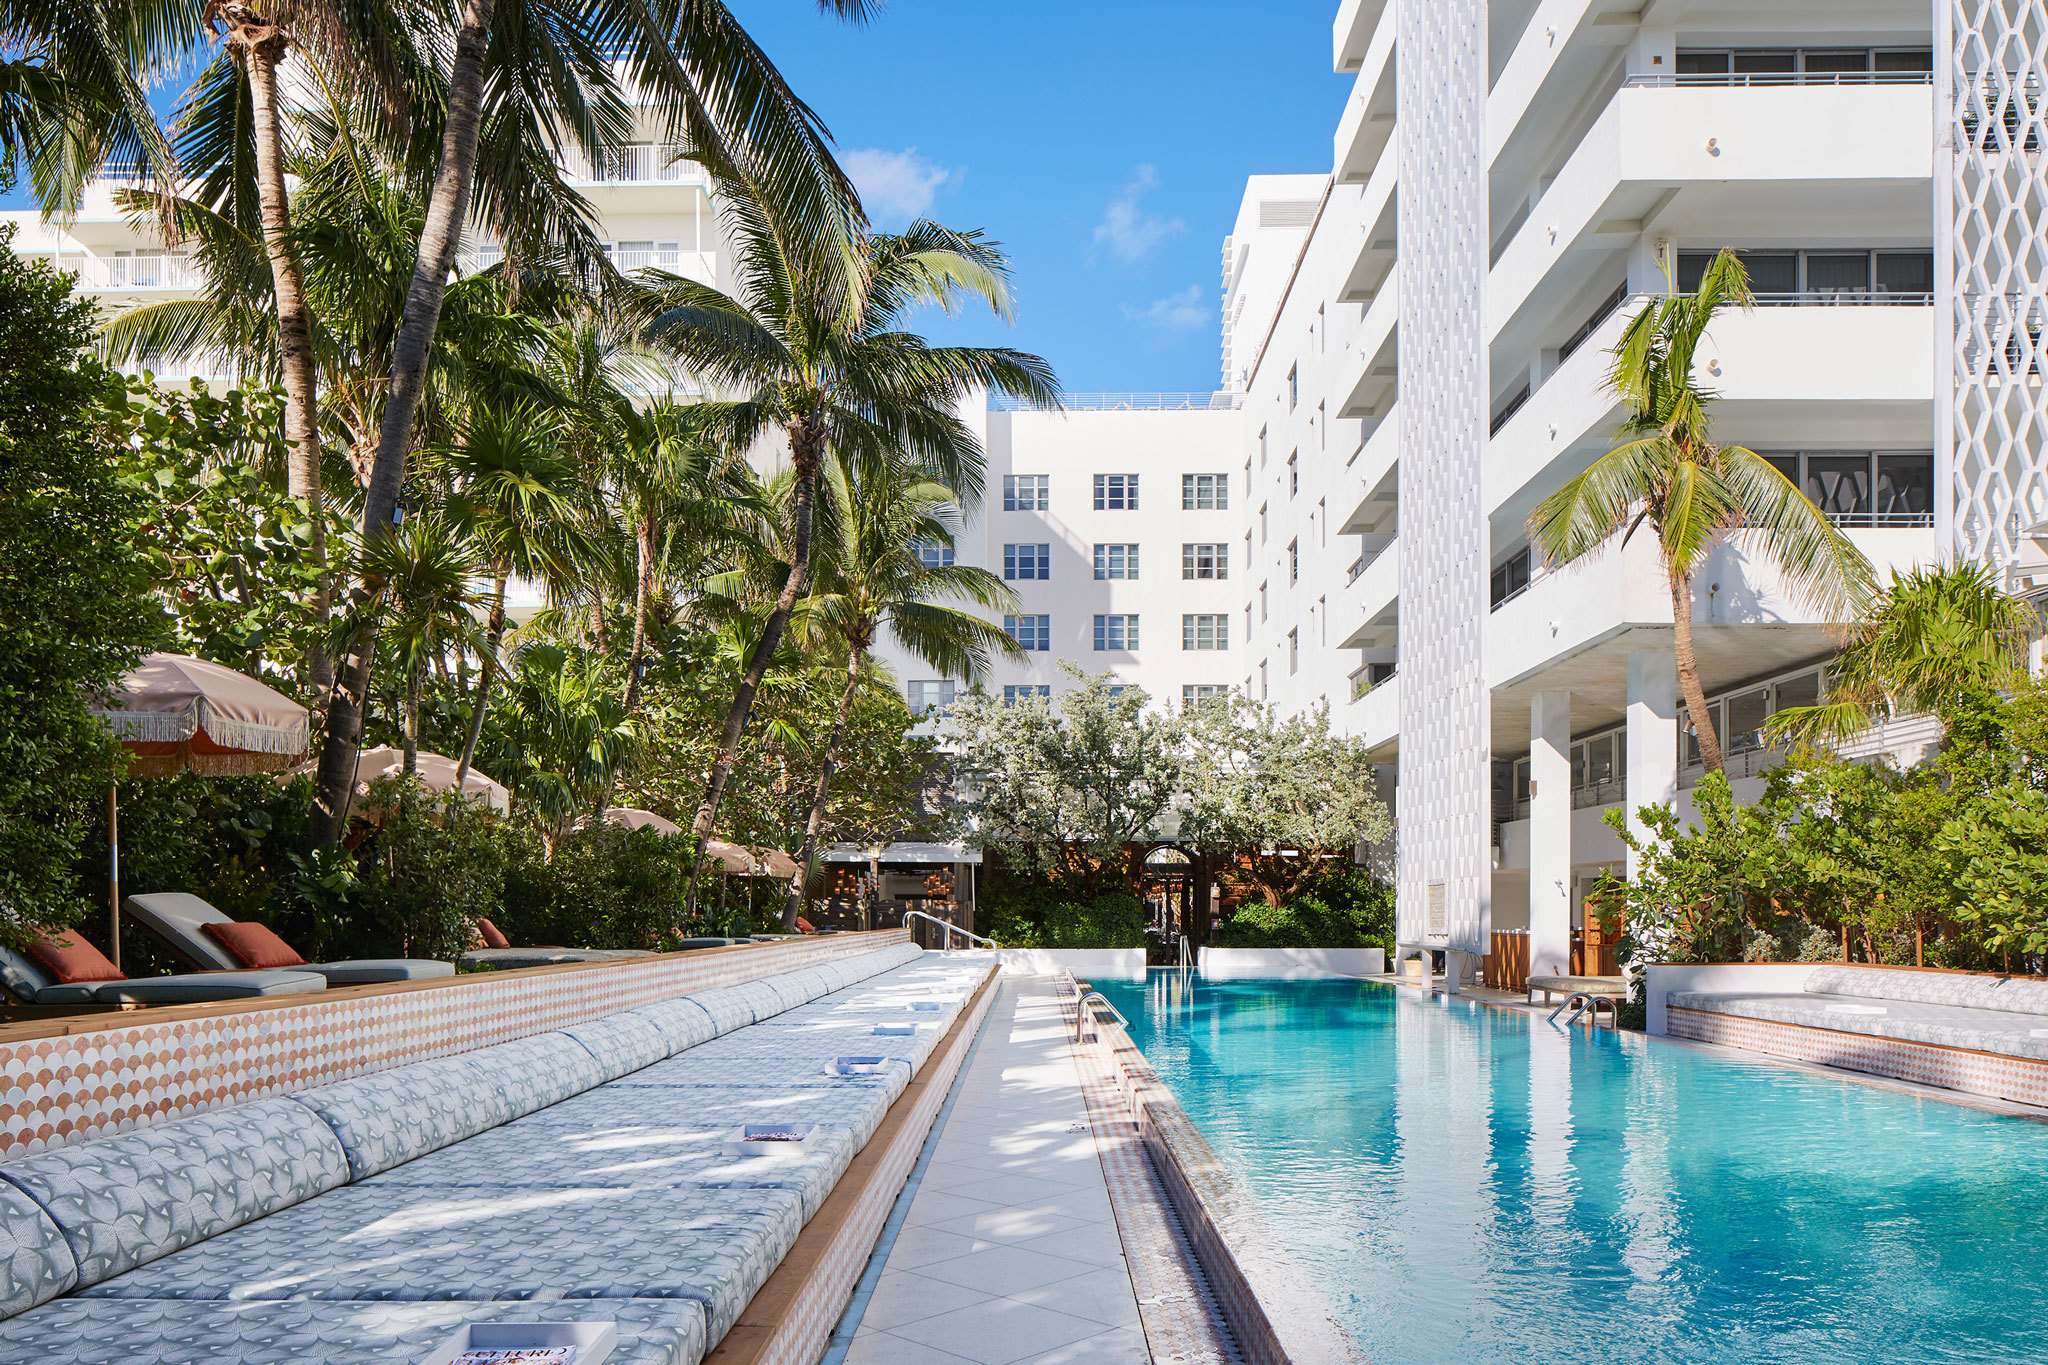 21 Best Miami Hotels For You to Book a Stay at in 2019